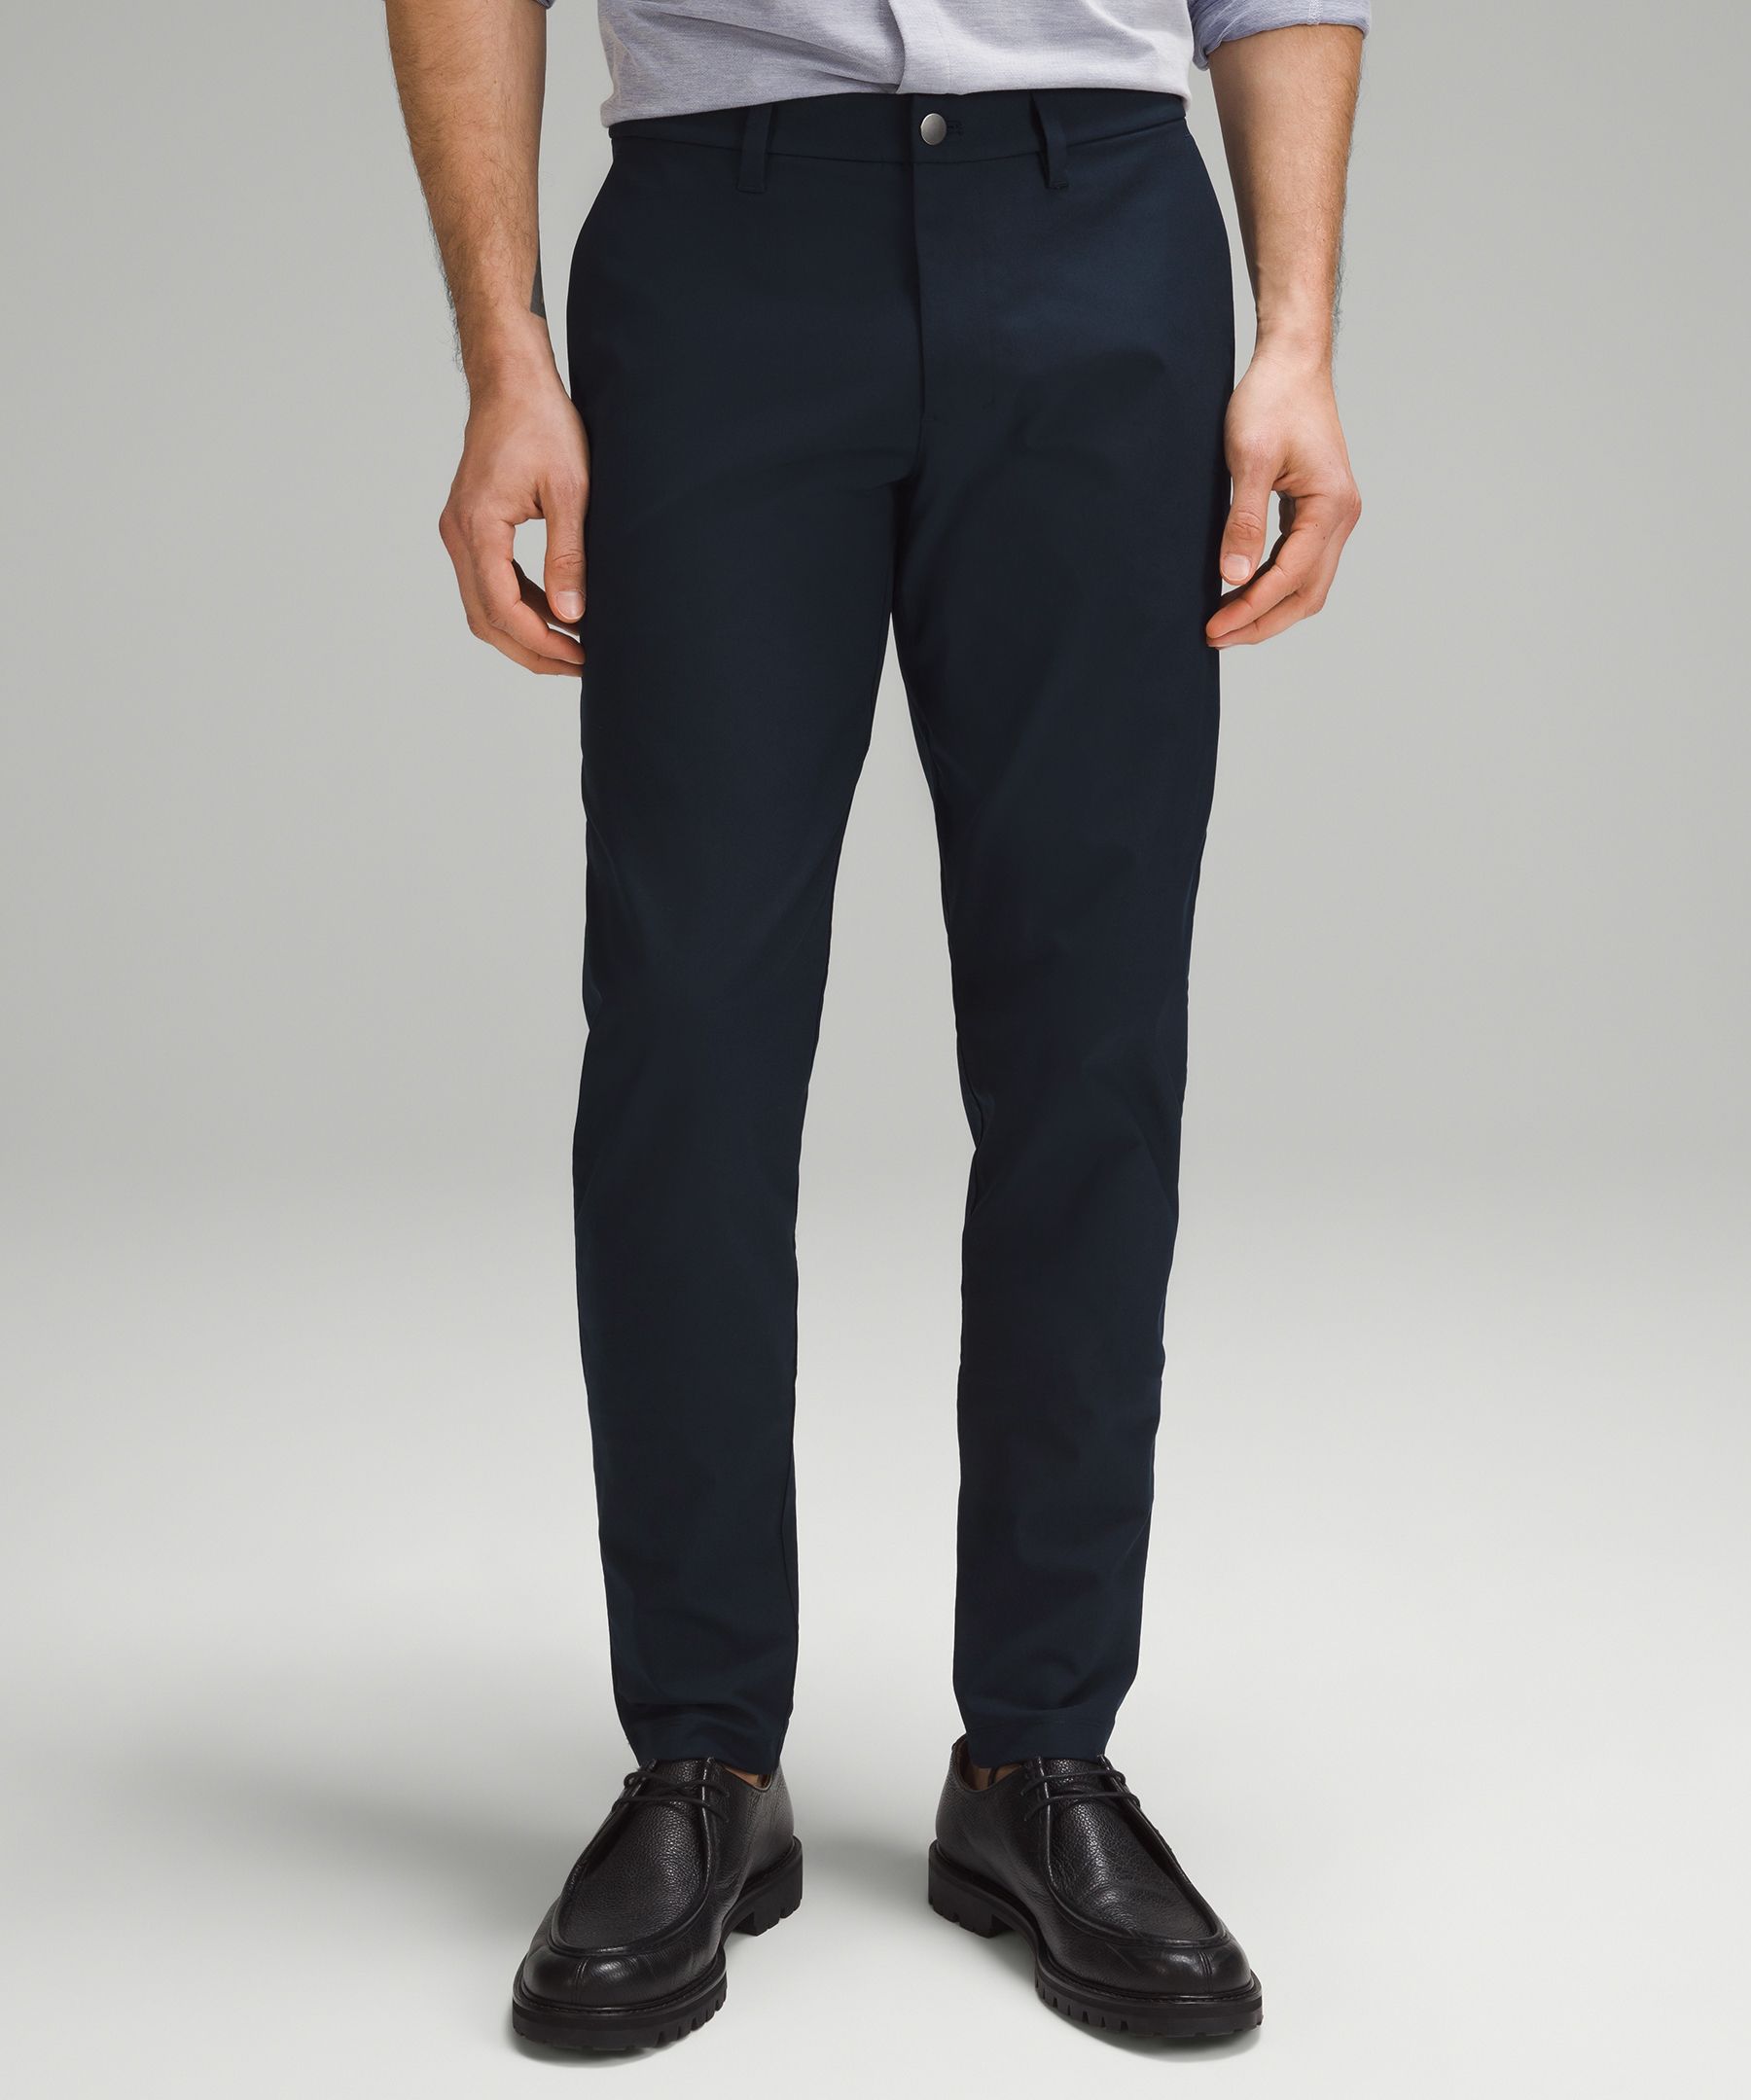 Shop Lululemon Abc Slim-fit Trousers 34"l Smooth Twill